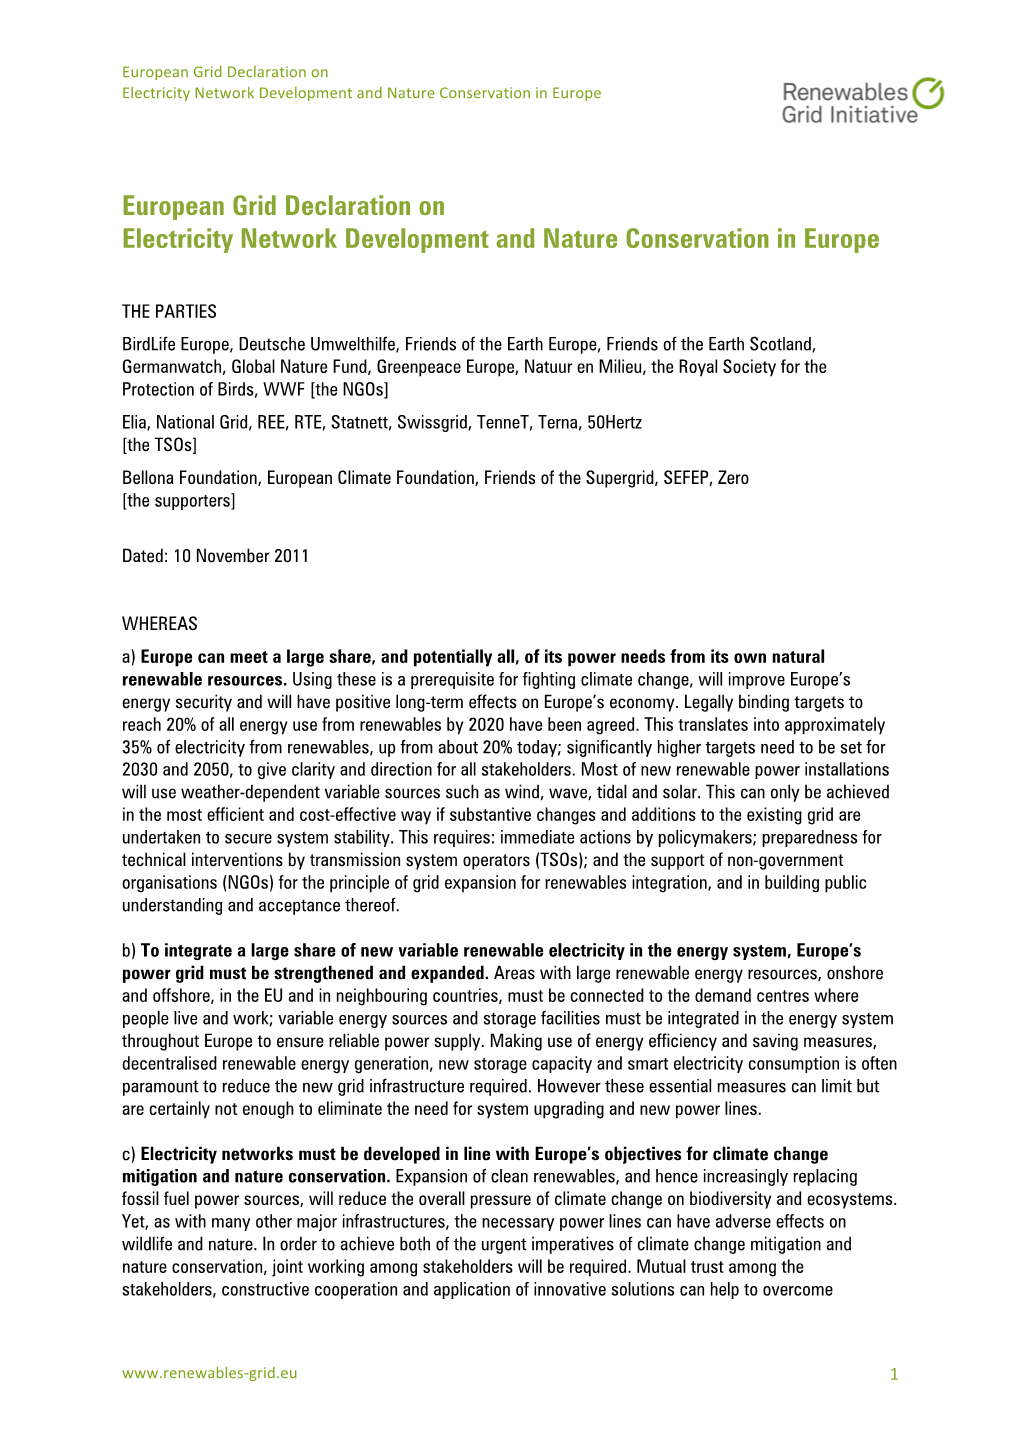 European Grid Declaration on Electricity Network Development and Nature Conservation in Europe